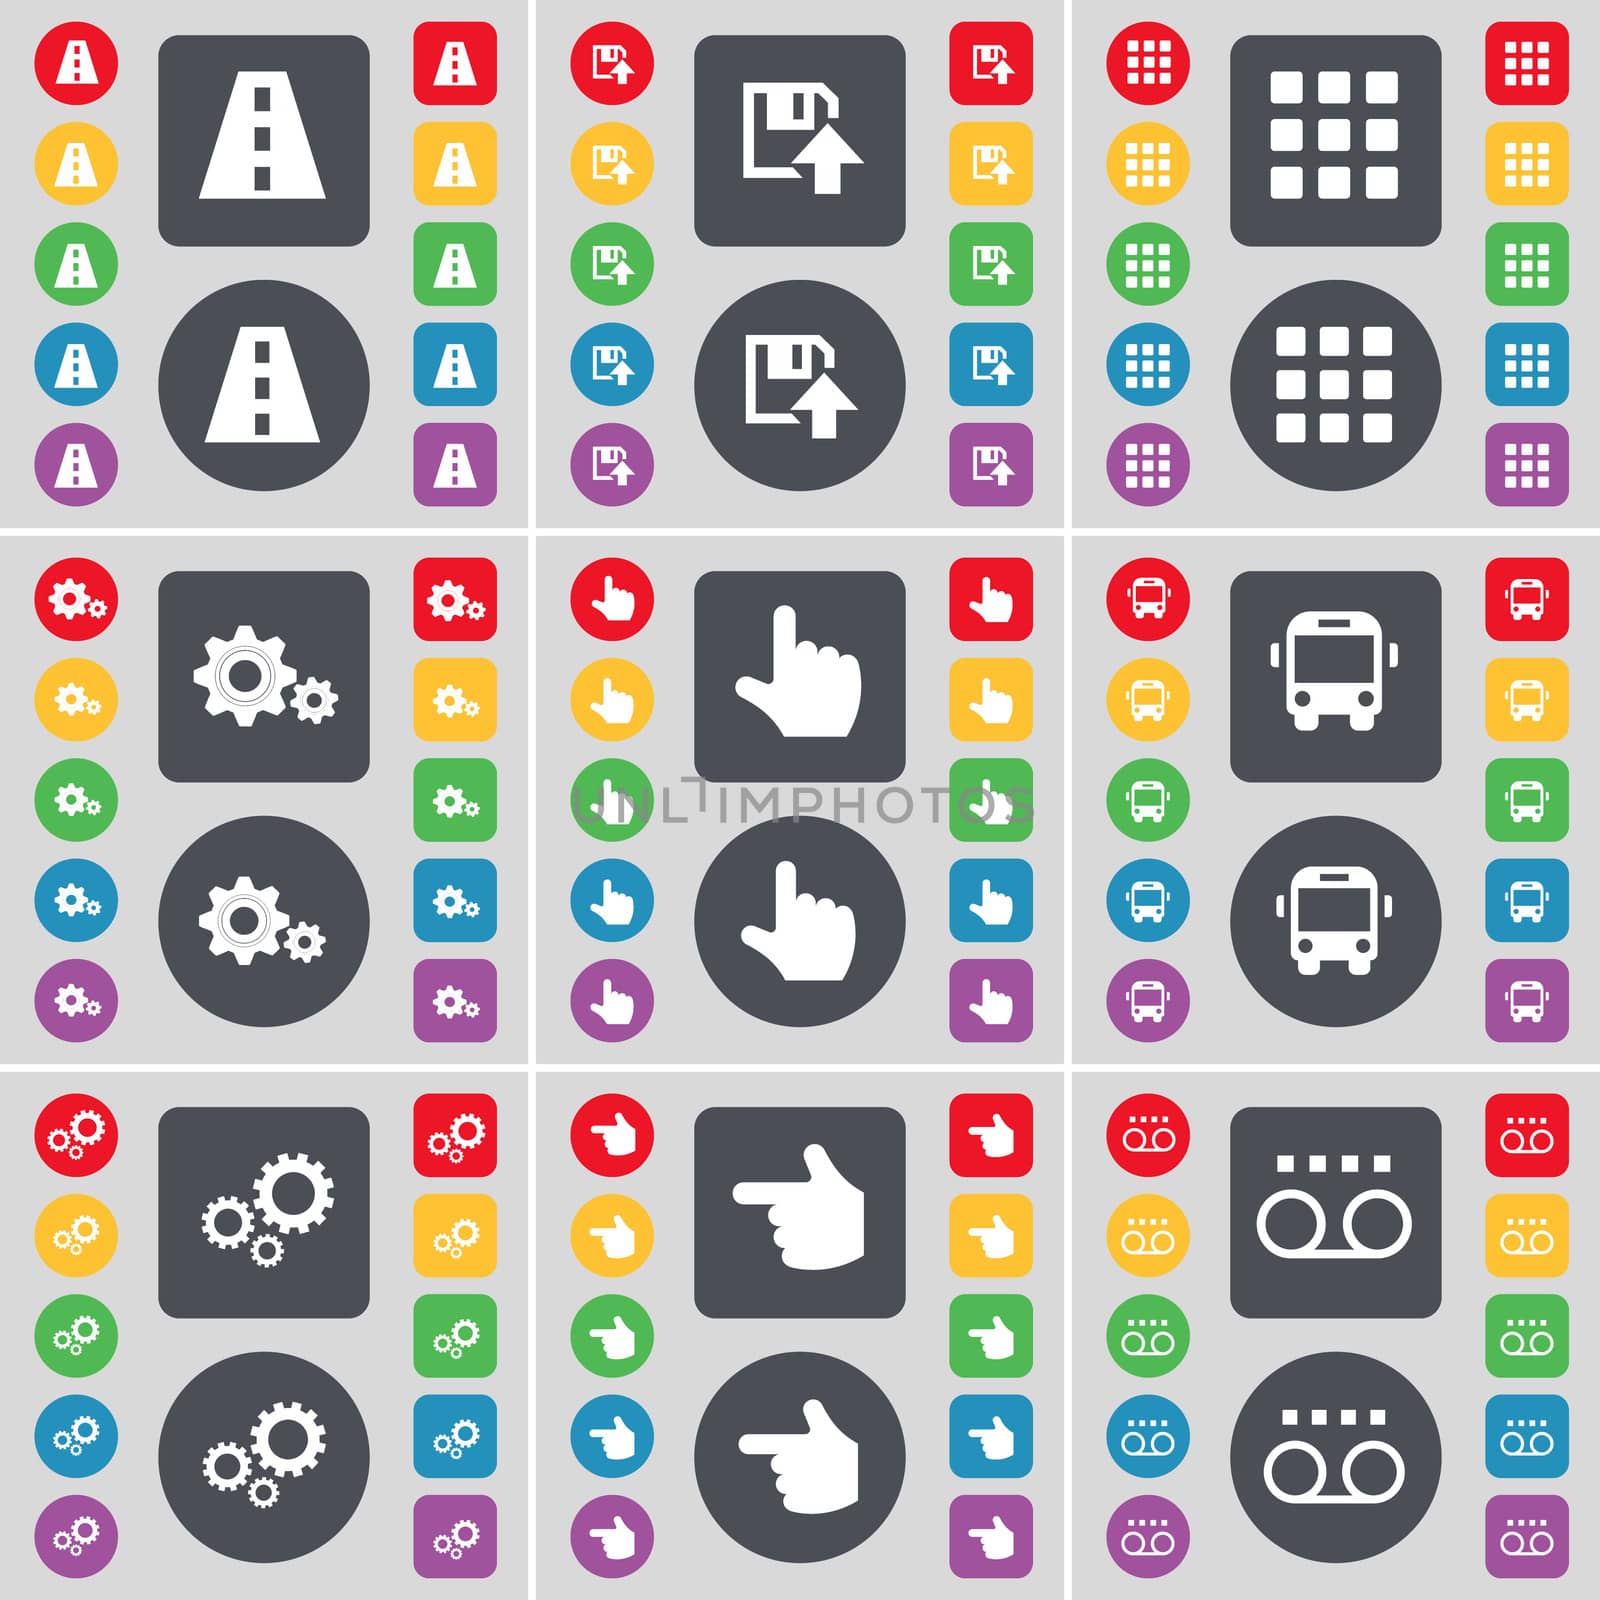 Road, Floppy, Apps, Gear, Hand, Bus, Cassette icon symbol. A large set of flat, colored buttons for your design. illustration